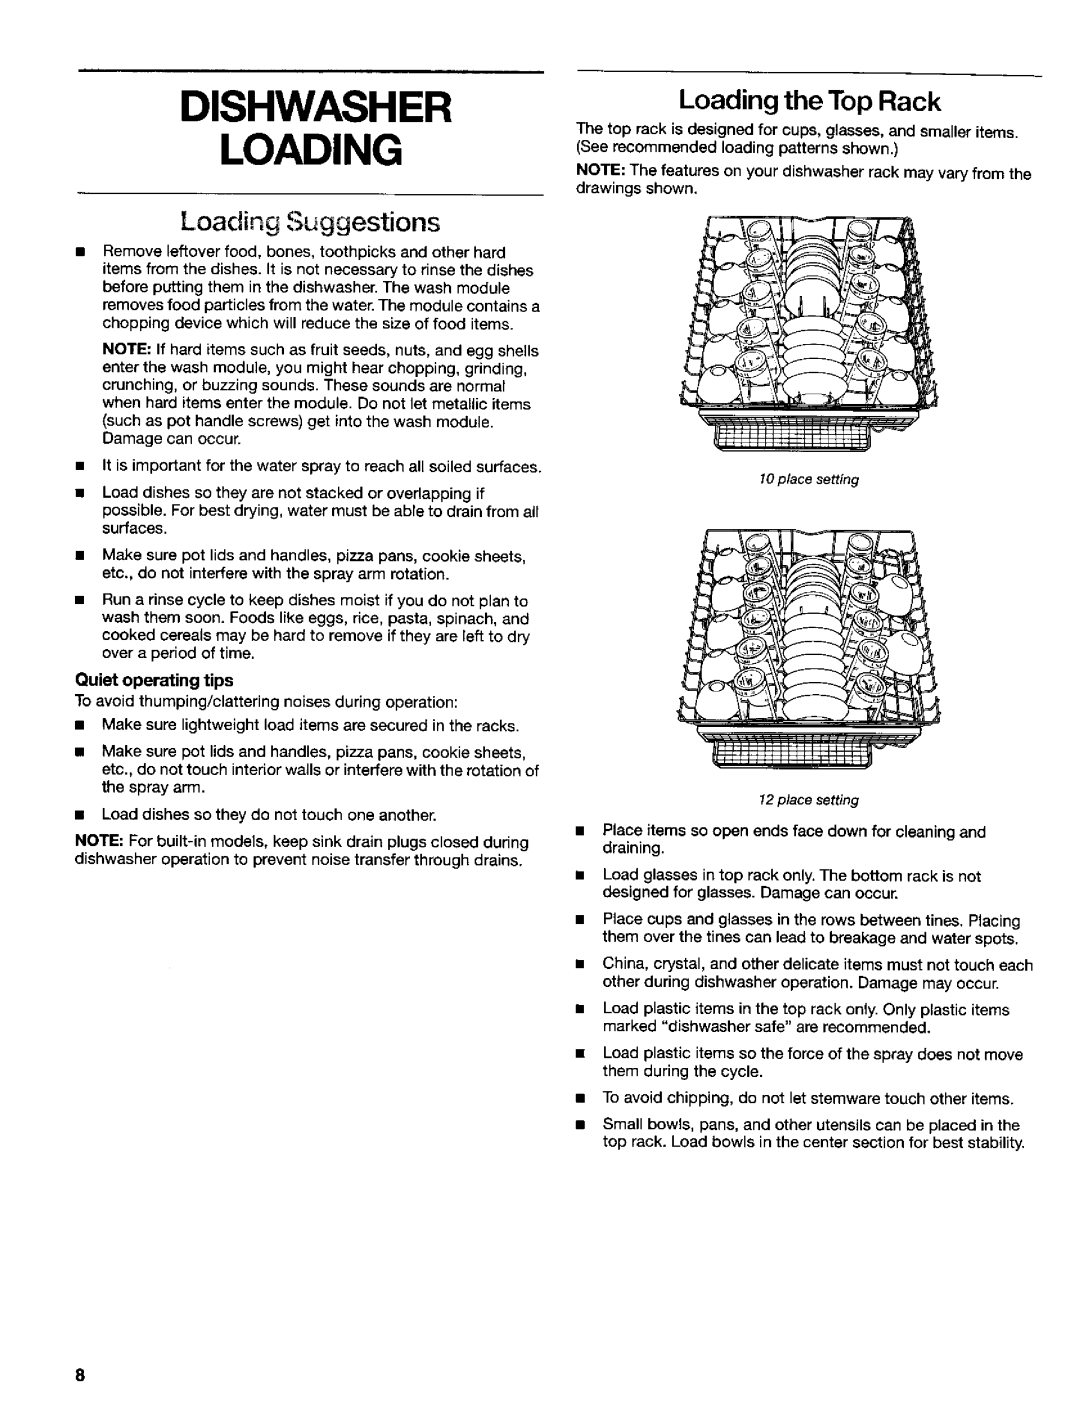 Kenmore 665.16837, 665.15839, 665.15832, 665.16834, 665.15834 manual Dishwasher Loading, Loading the Top Rack, place setting 